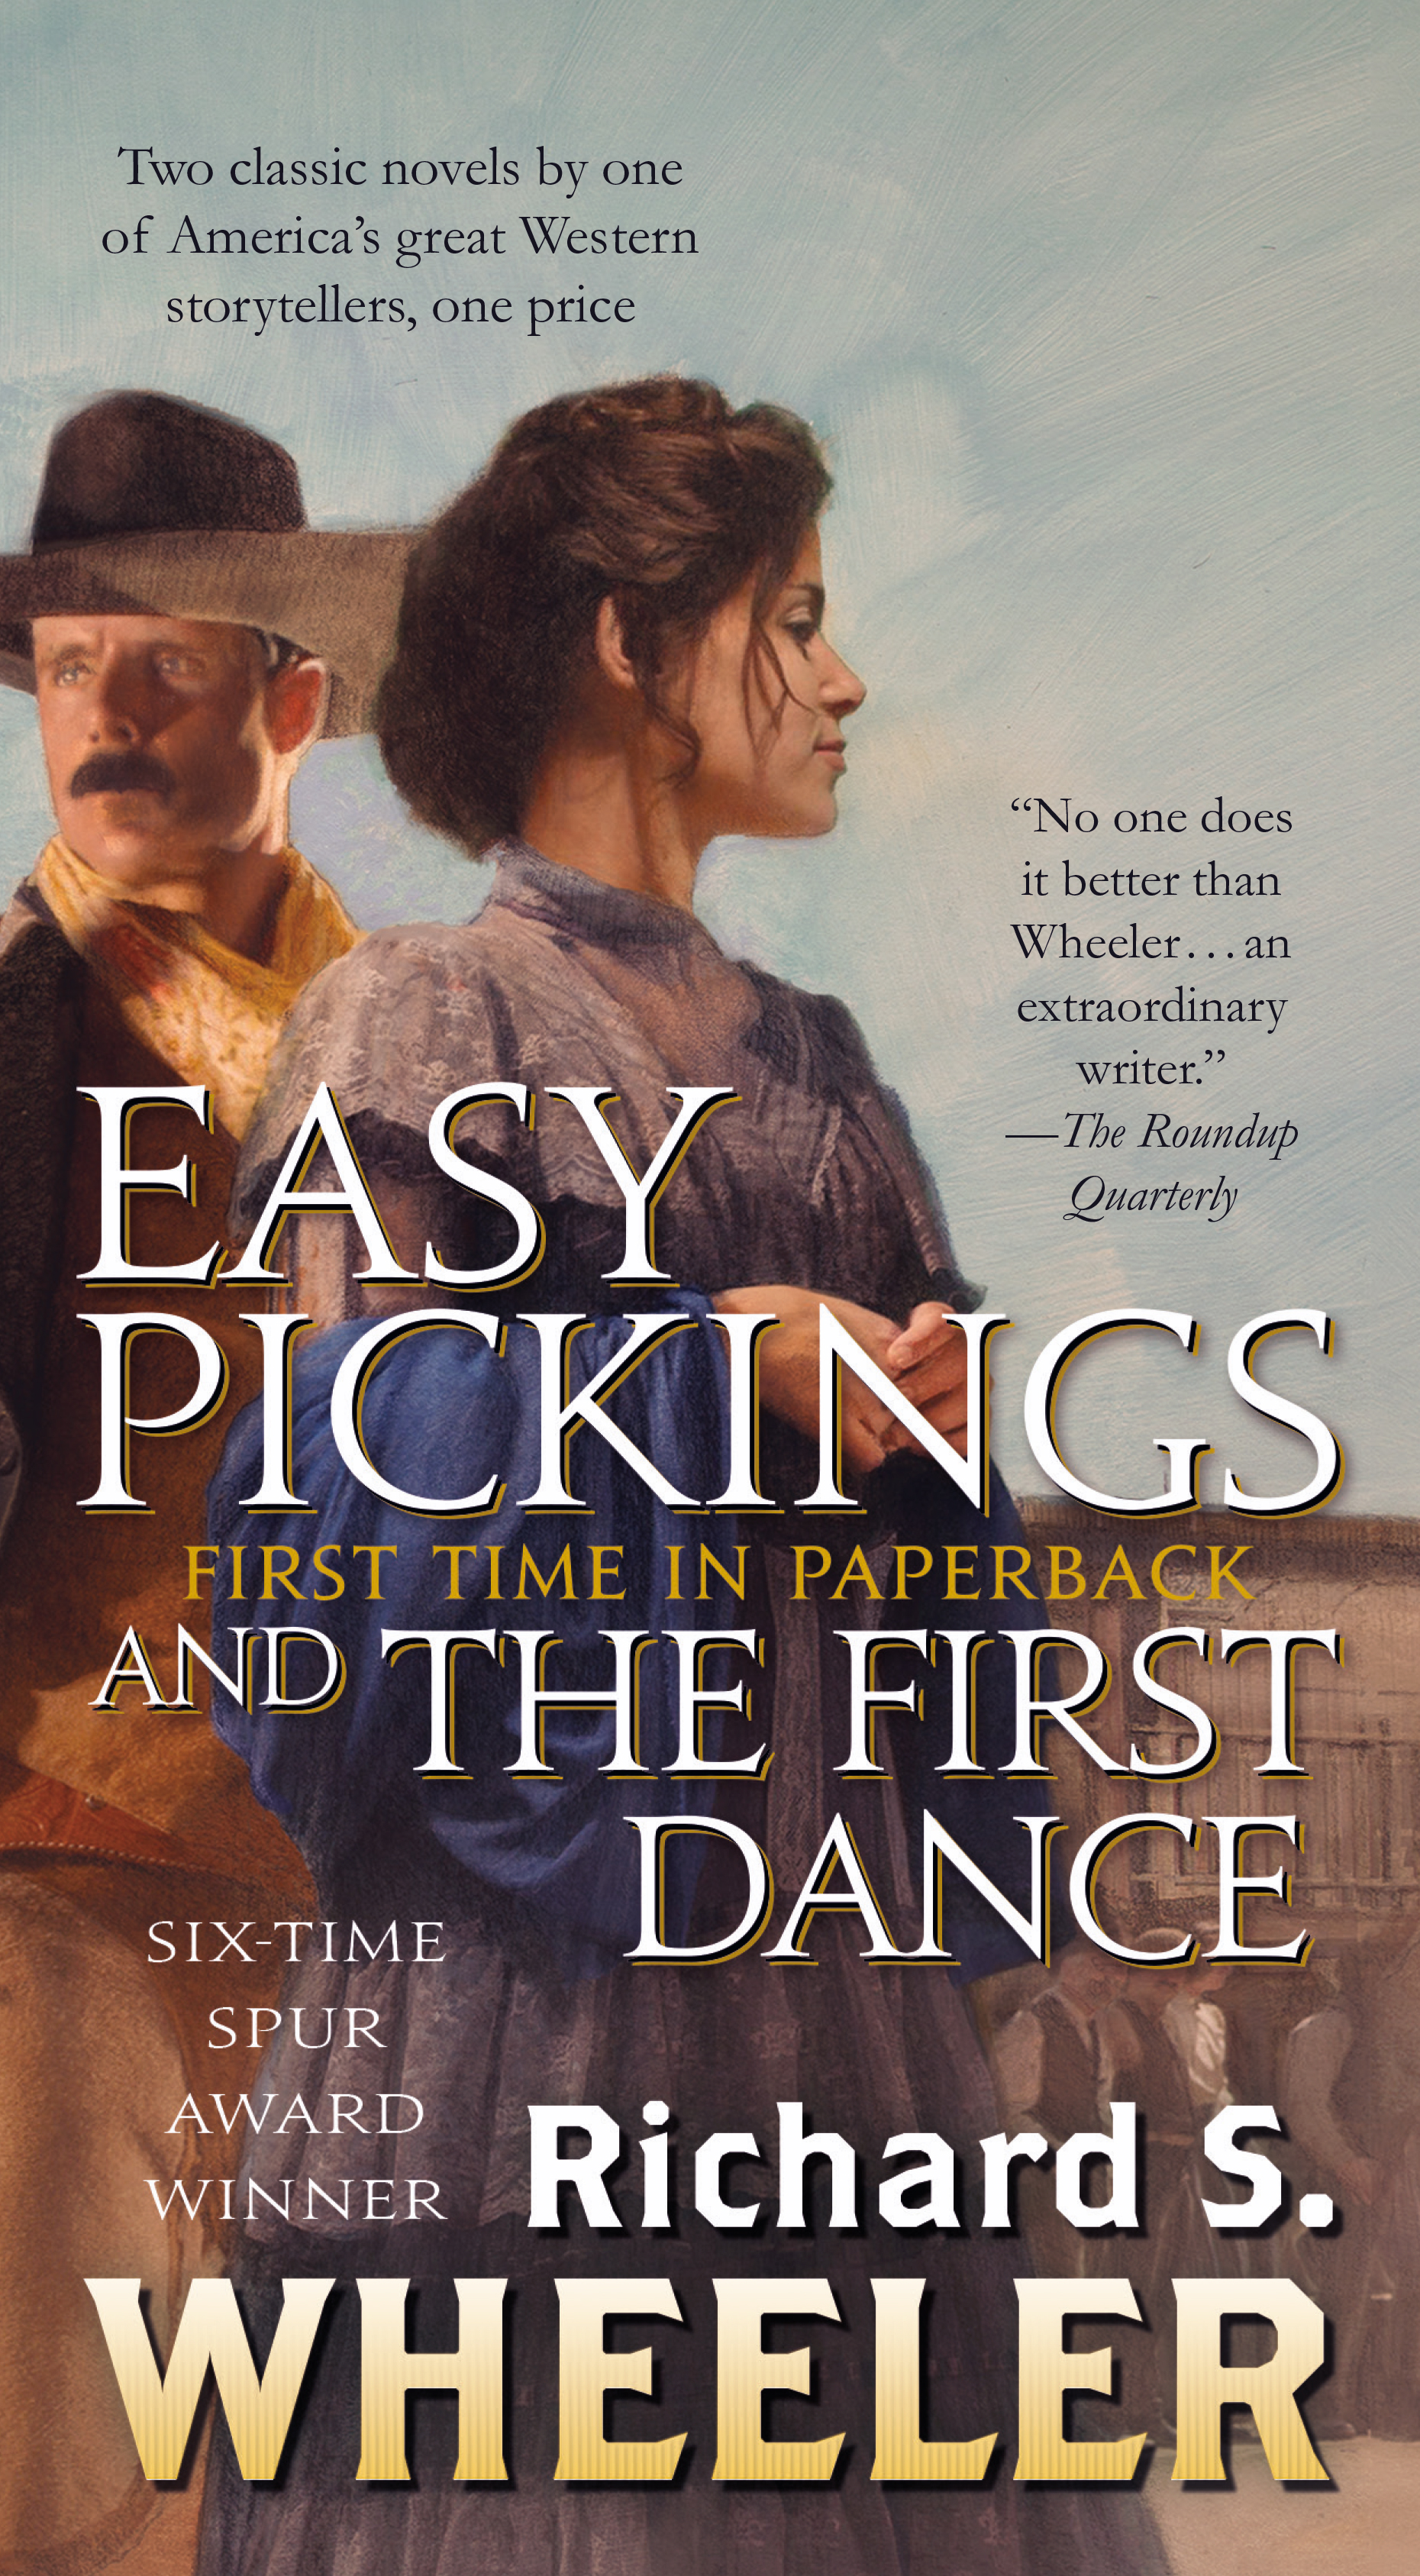 Easy Pickings and The First Dance by Richard S. Wheeler